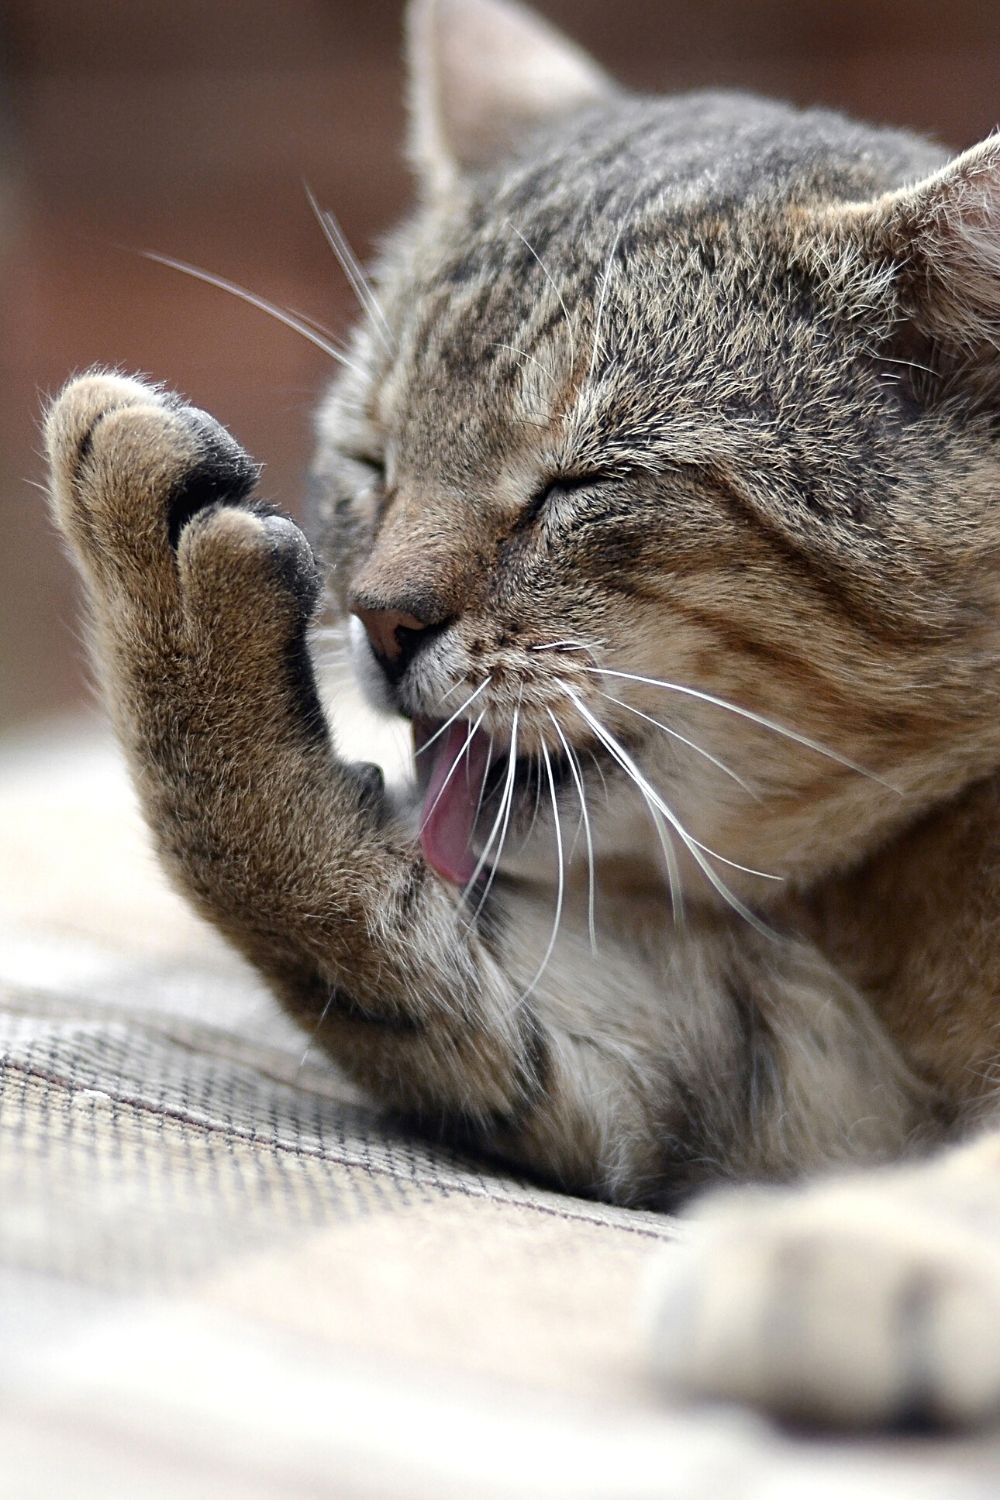 One reason why cats smell good is because they have fewer sweat glands under their fur, aside from regular grooming